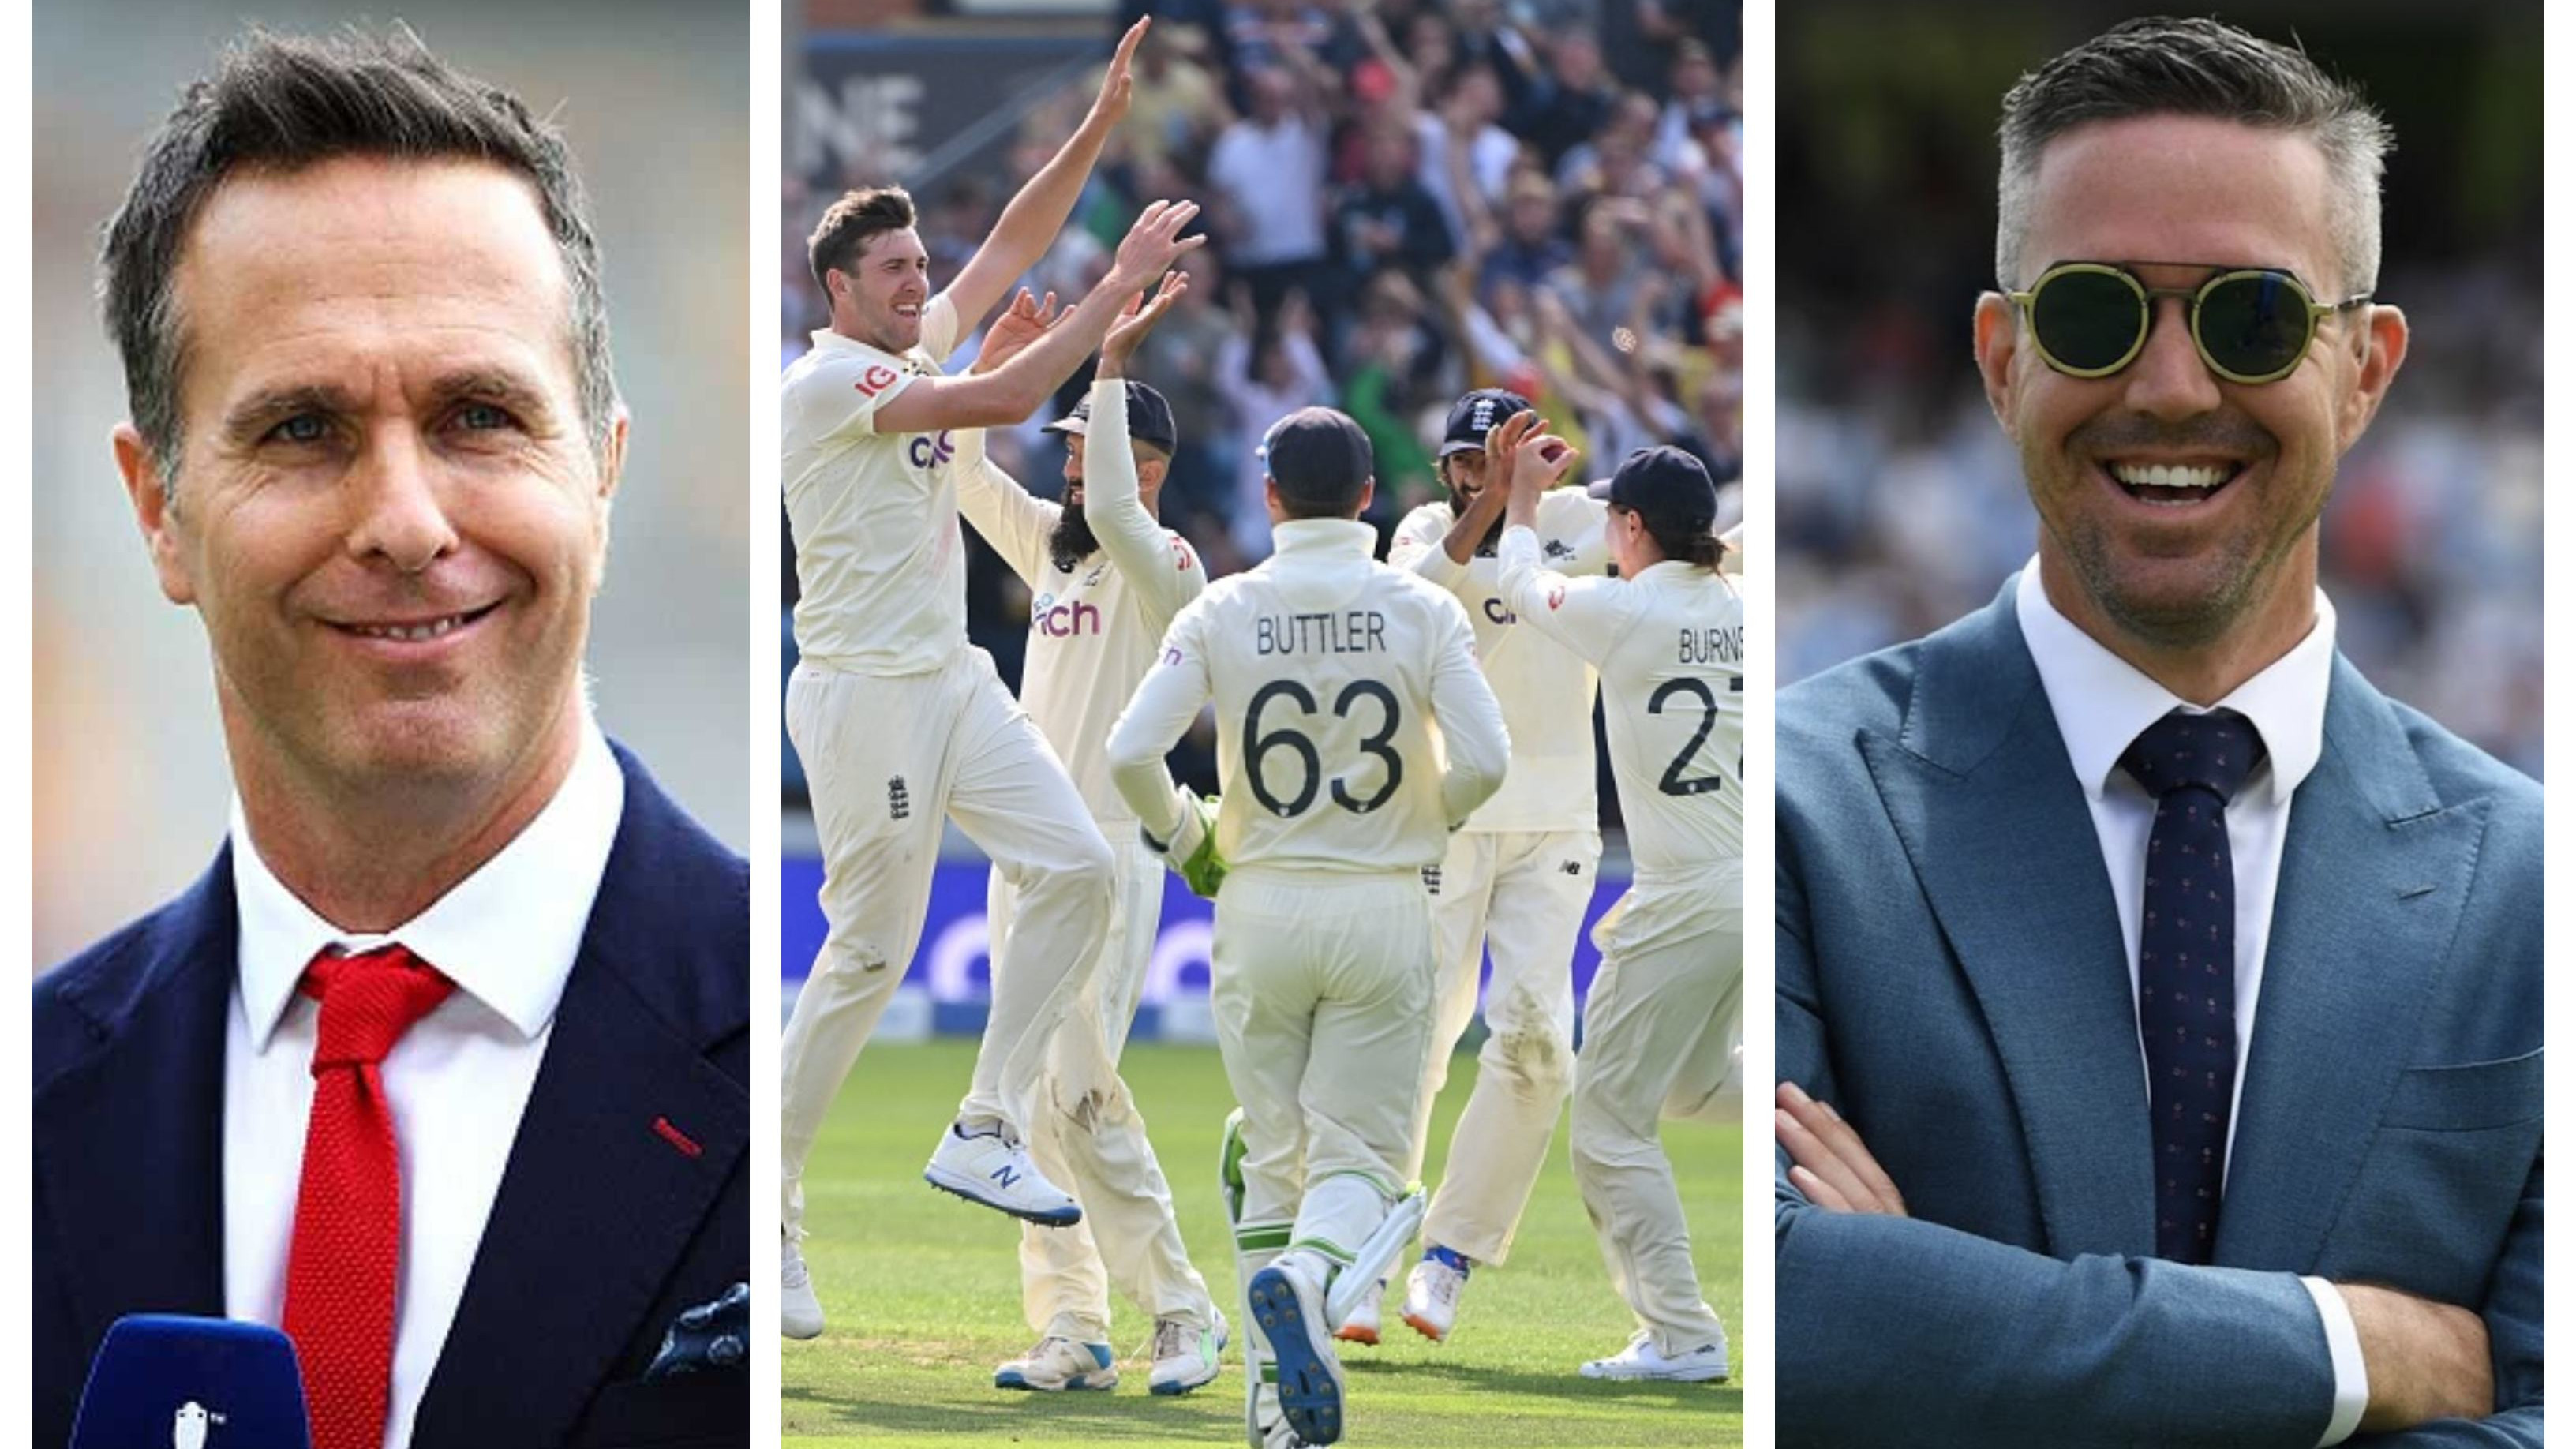 ENG v IND 2021: Cricket fraternity stunned as England bowl out India for a paltry 78 in 1st innings at Leeds